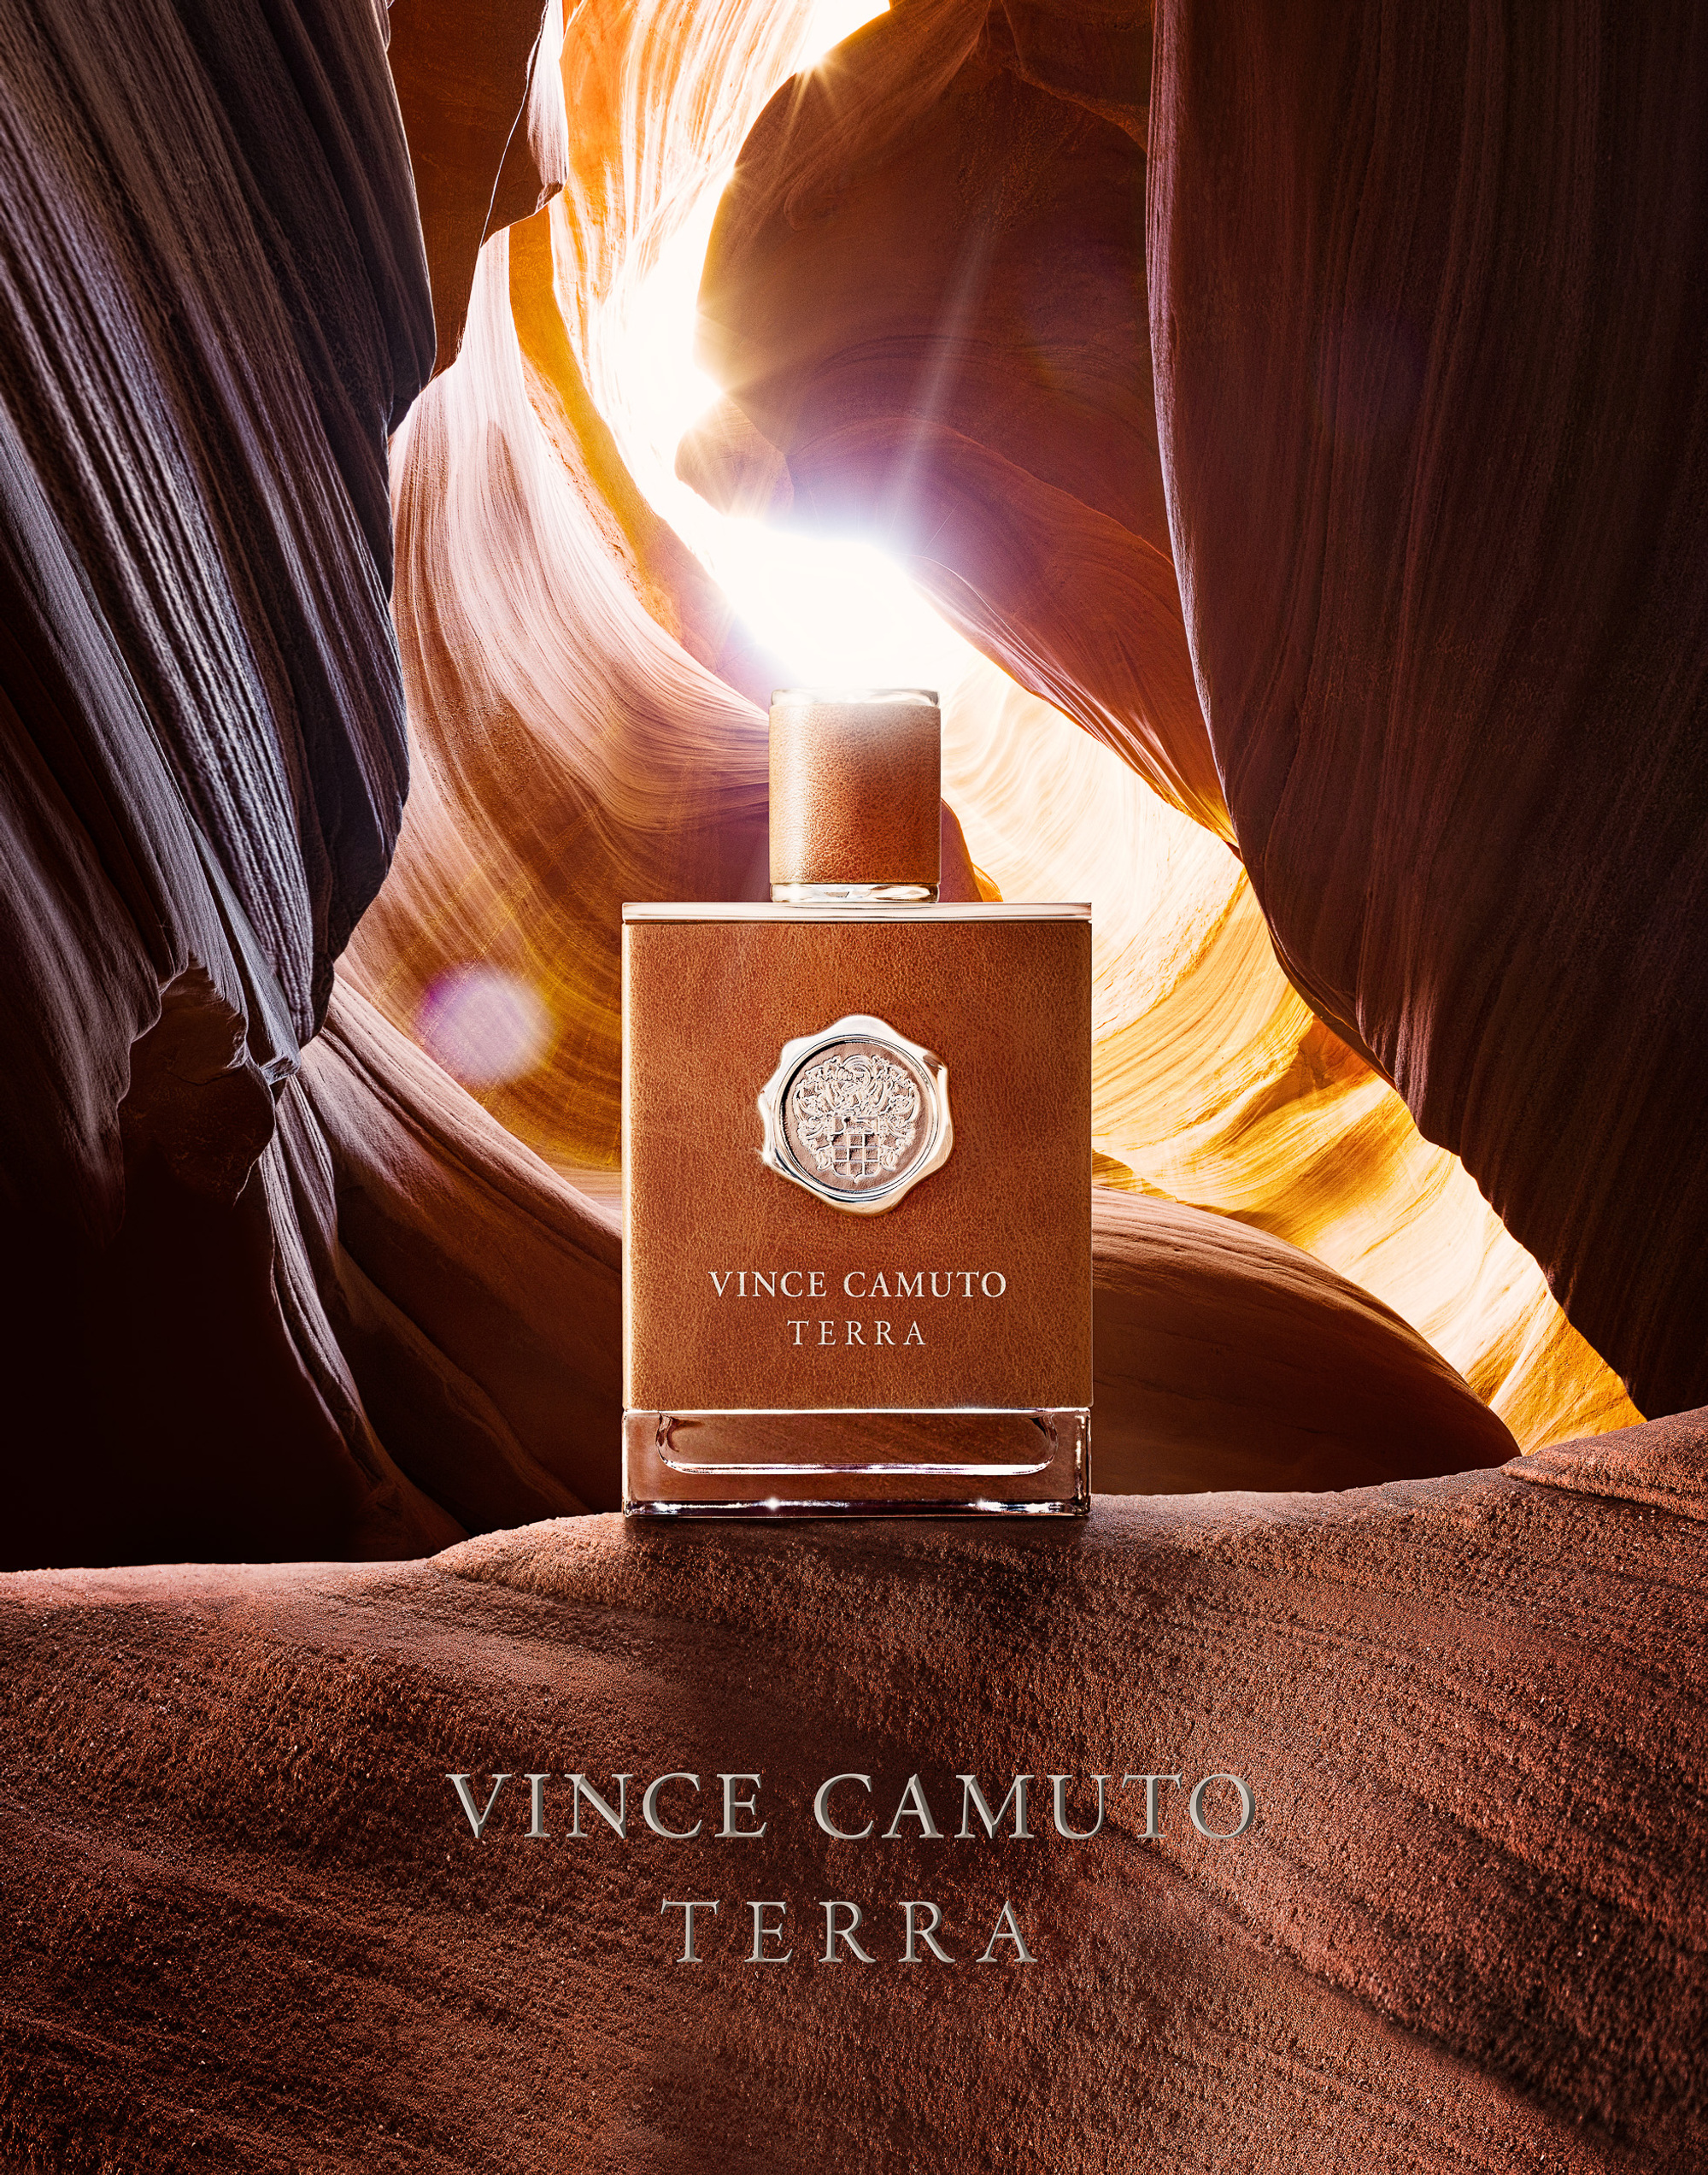 Vince Camuto fragrance campaign photography  by commercial, product & advertising photographer Timothy Hogan in studio Los Angeles